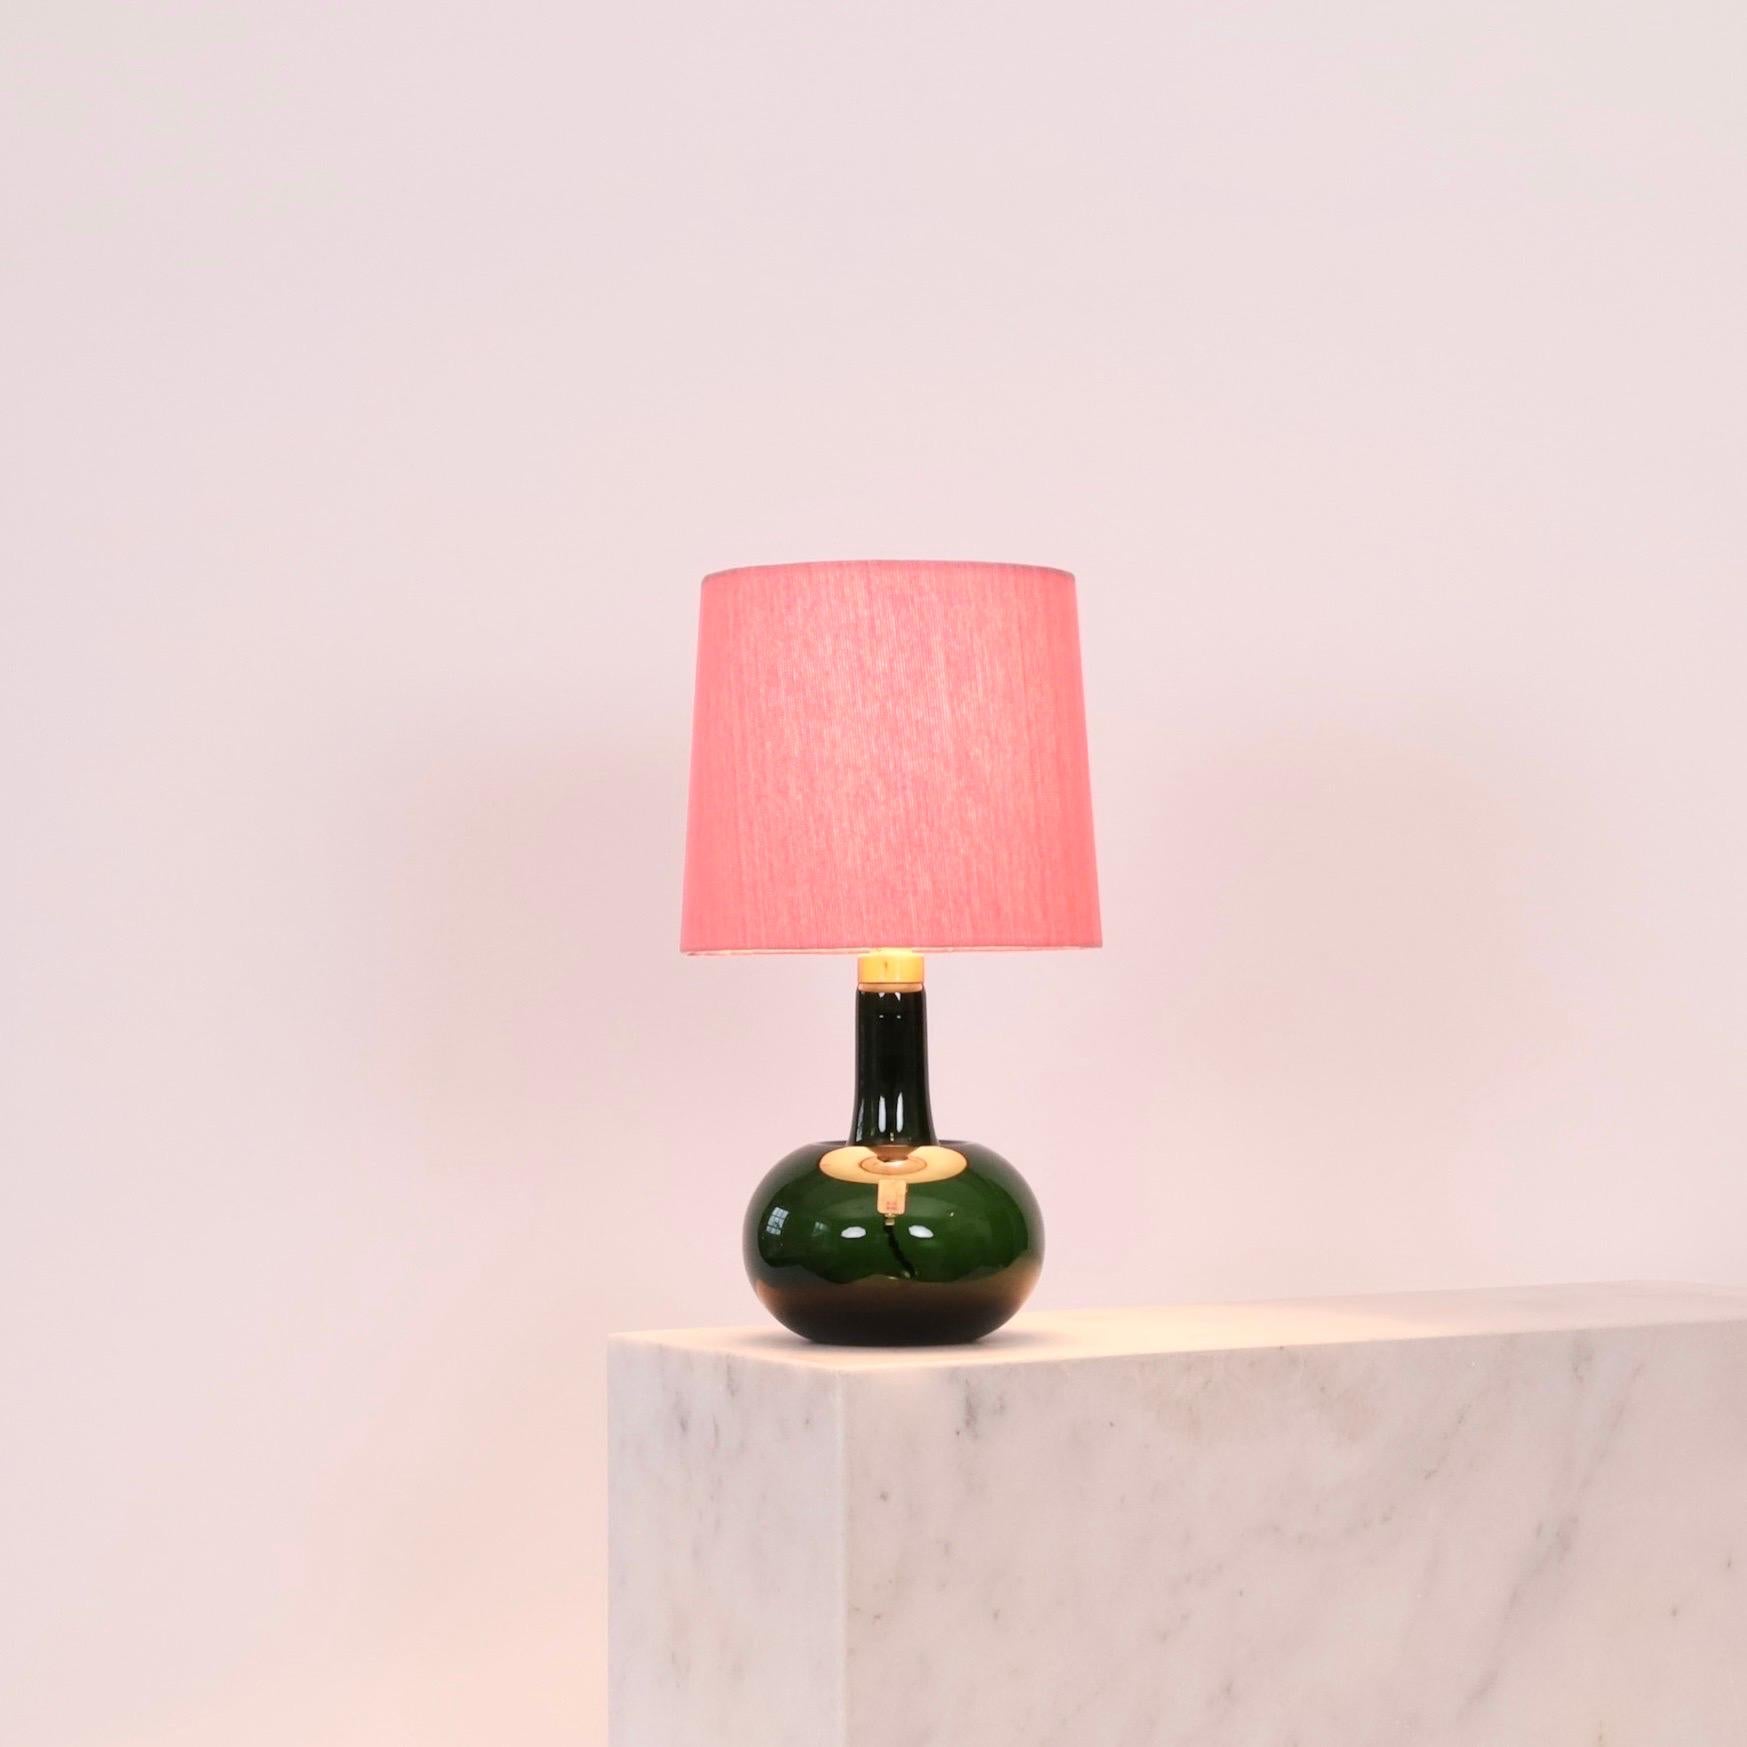 A Green desk lamp designed by Michael Bang for Danish Holmegaard Glasværk in 1975 accomplished new a shade made of artisan textile from Mallorca. A colorful attribution to the a modern interior.

* A Green glass table lamp with brass neck and a Pink